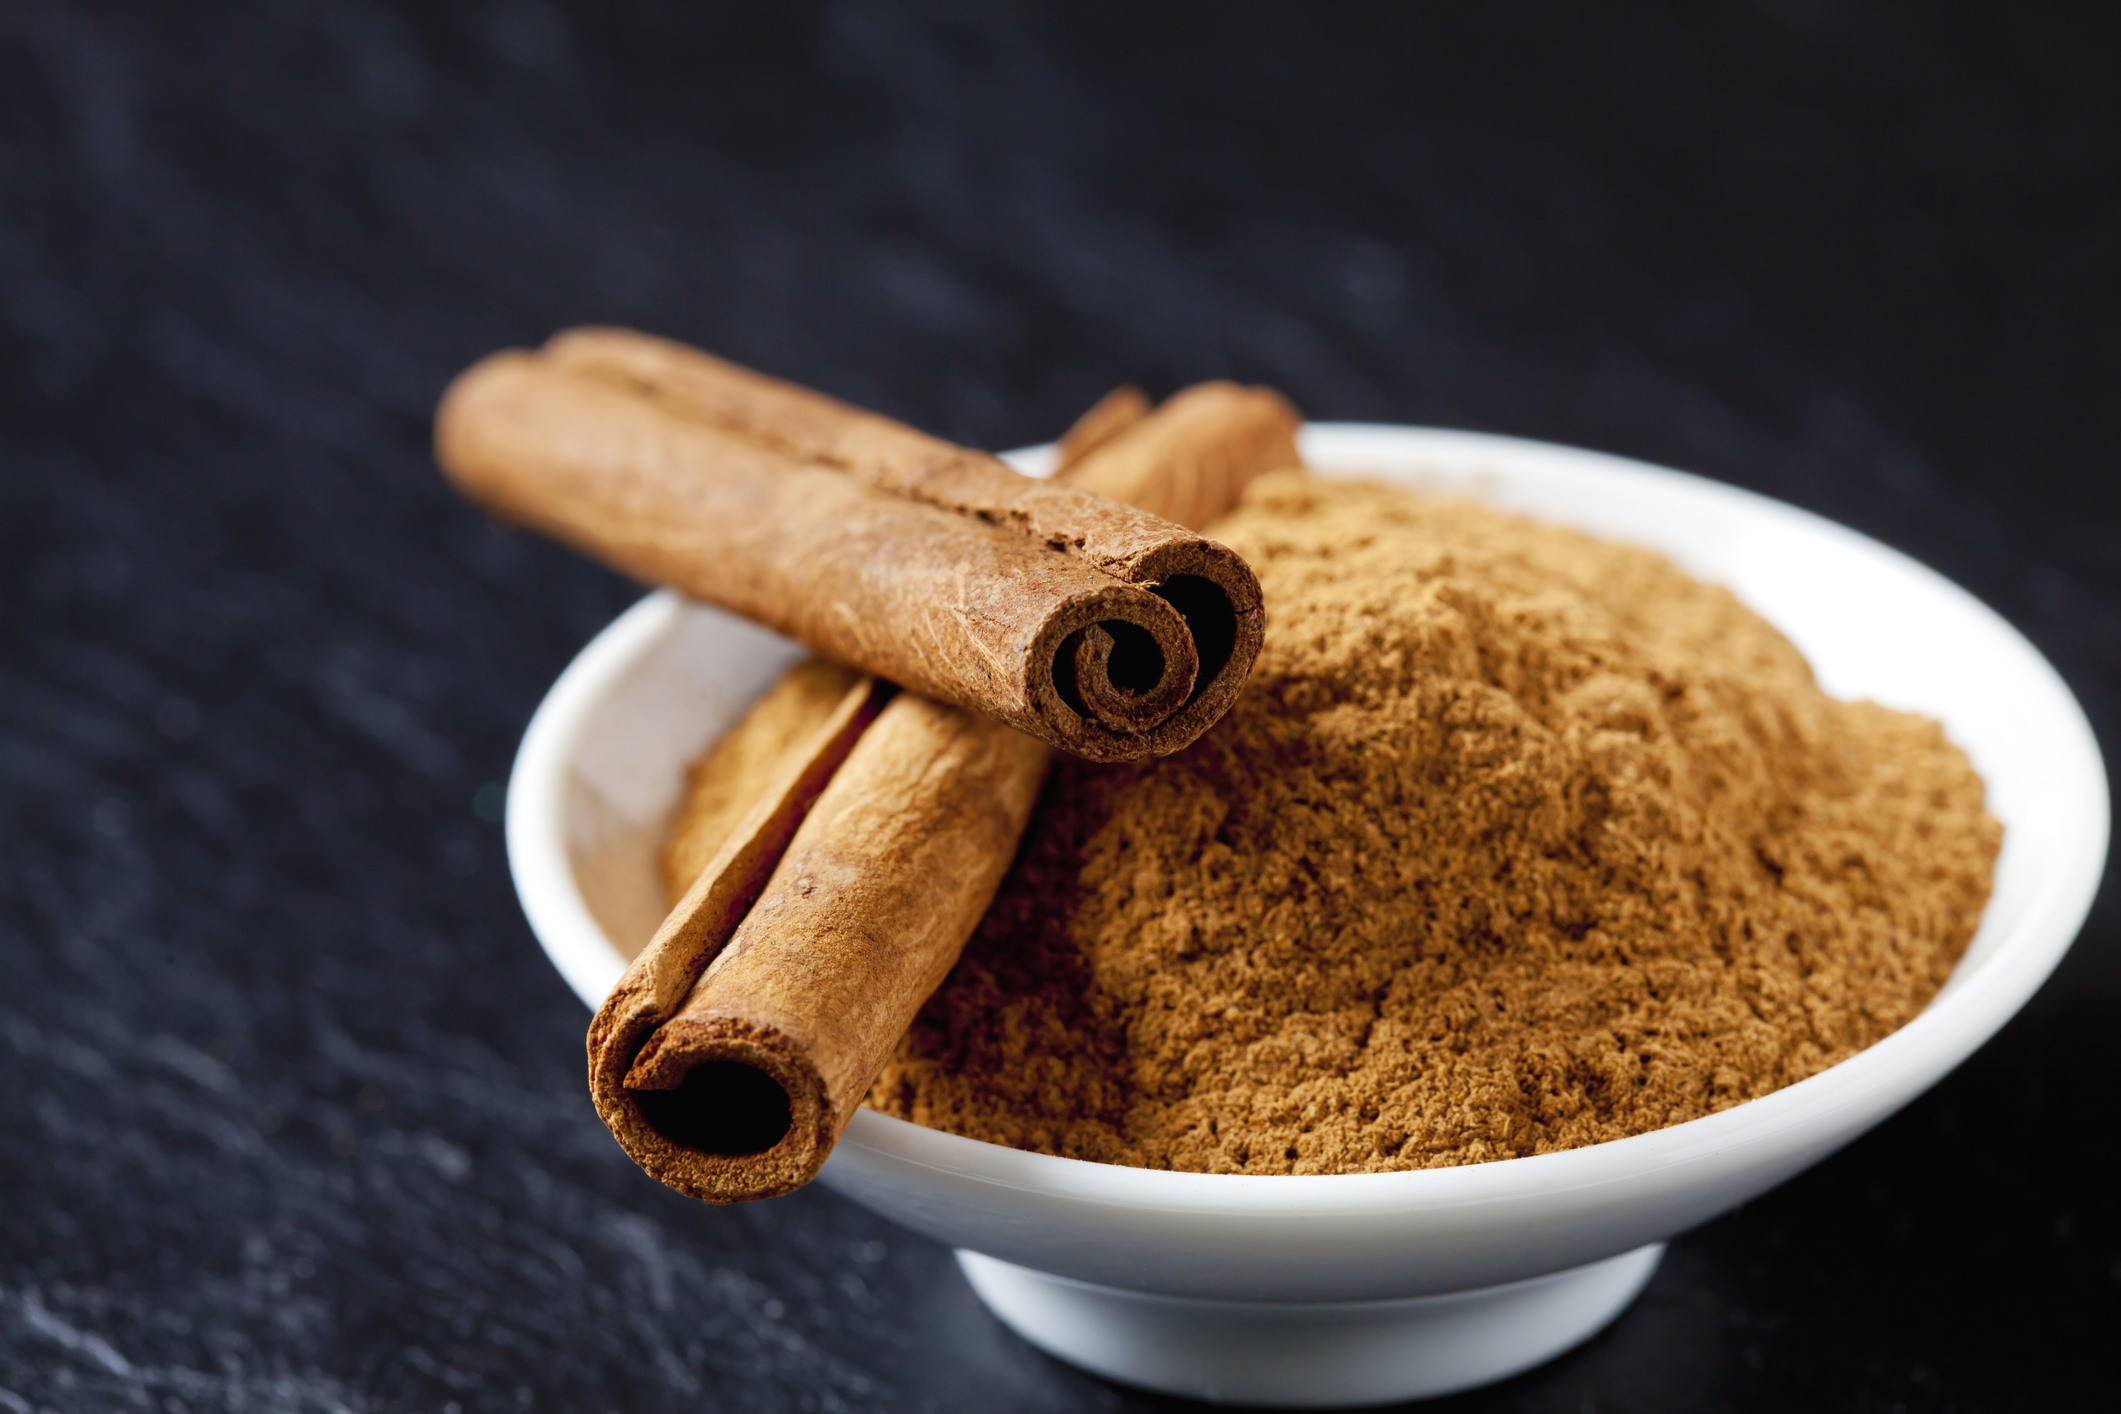 Ground cinnamon and cinnamon sticks in a white bowl on a dark surface